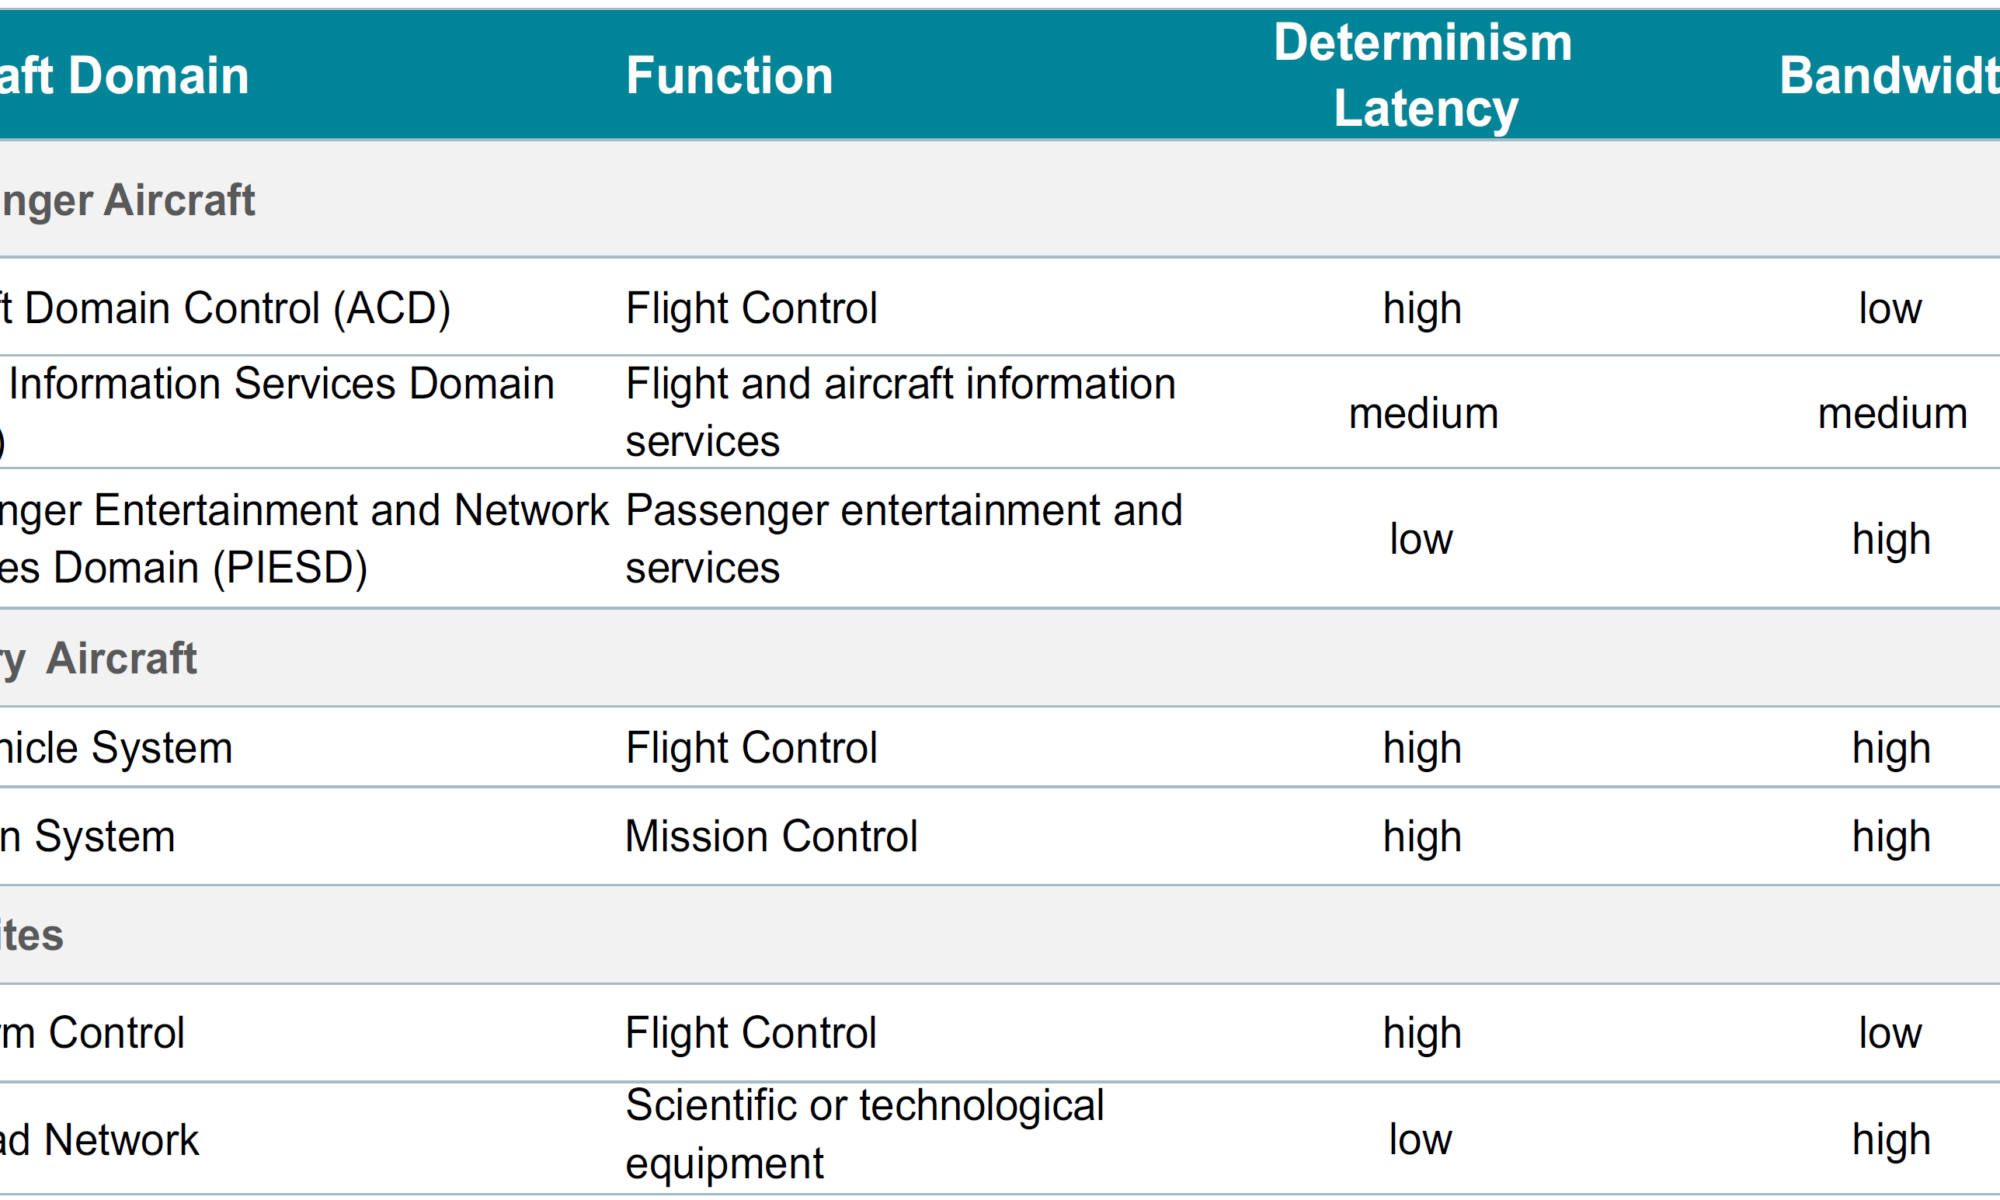 Aircraft domain requirements for time sensitive networking in aerospace